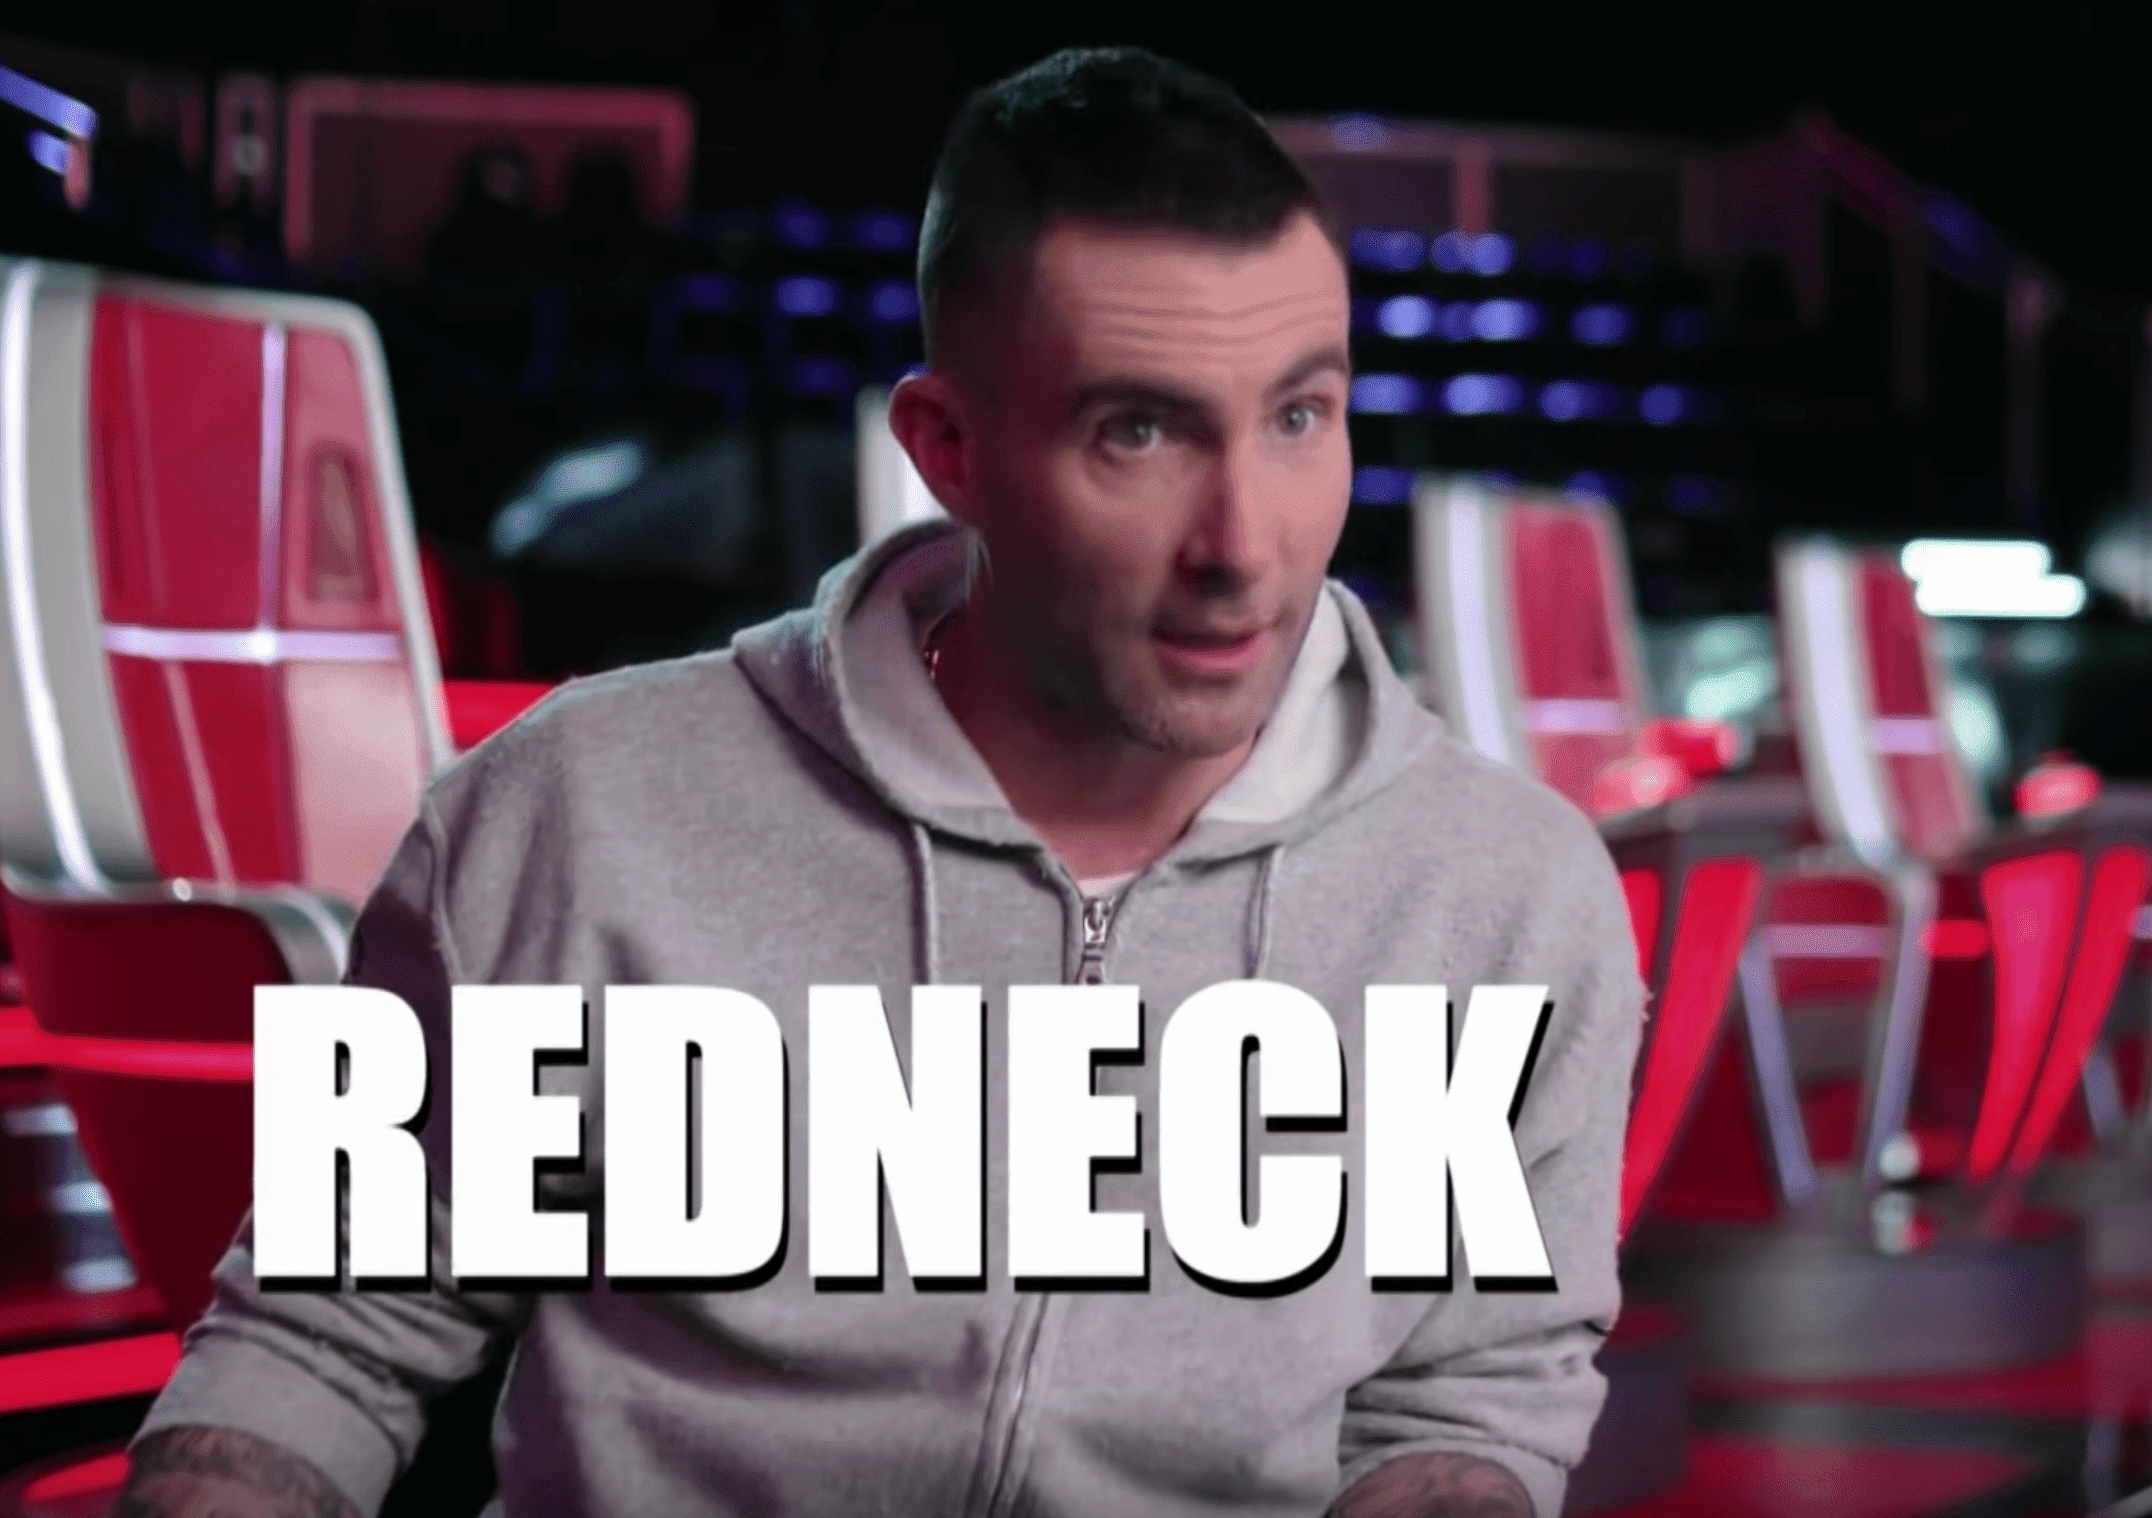 Adam Levine in the set of 'The Voice'. | Source: YouTube/TheVoice